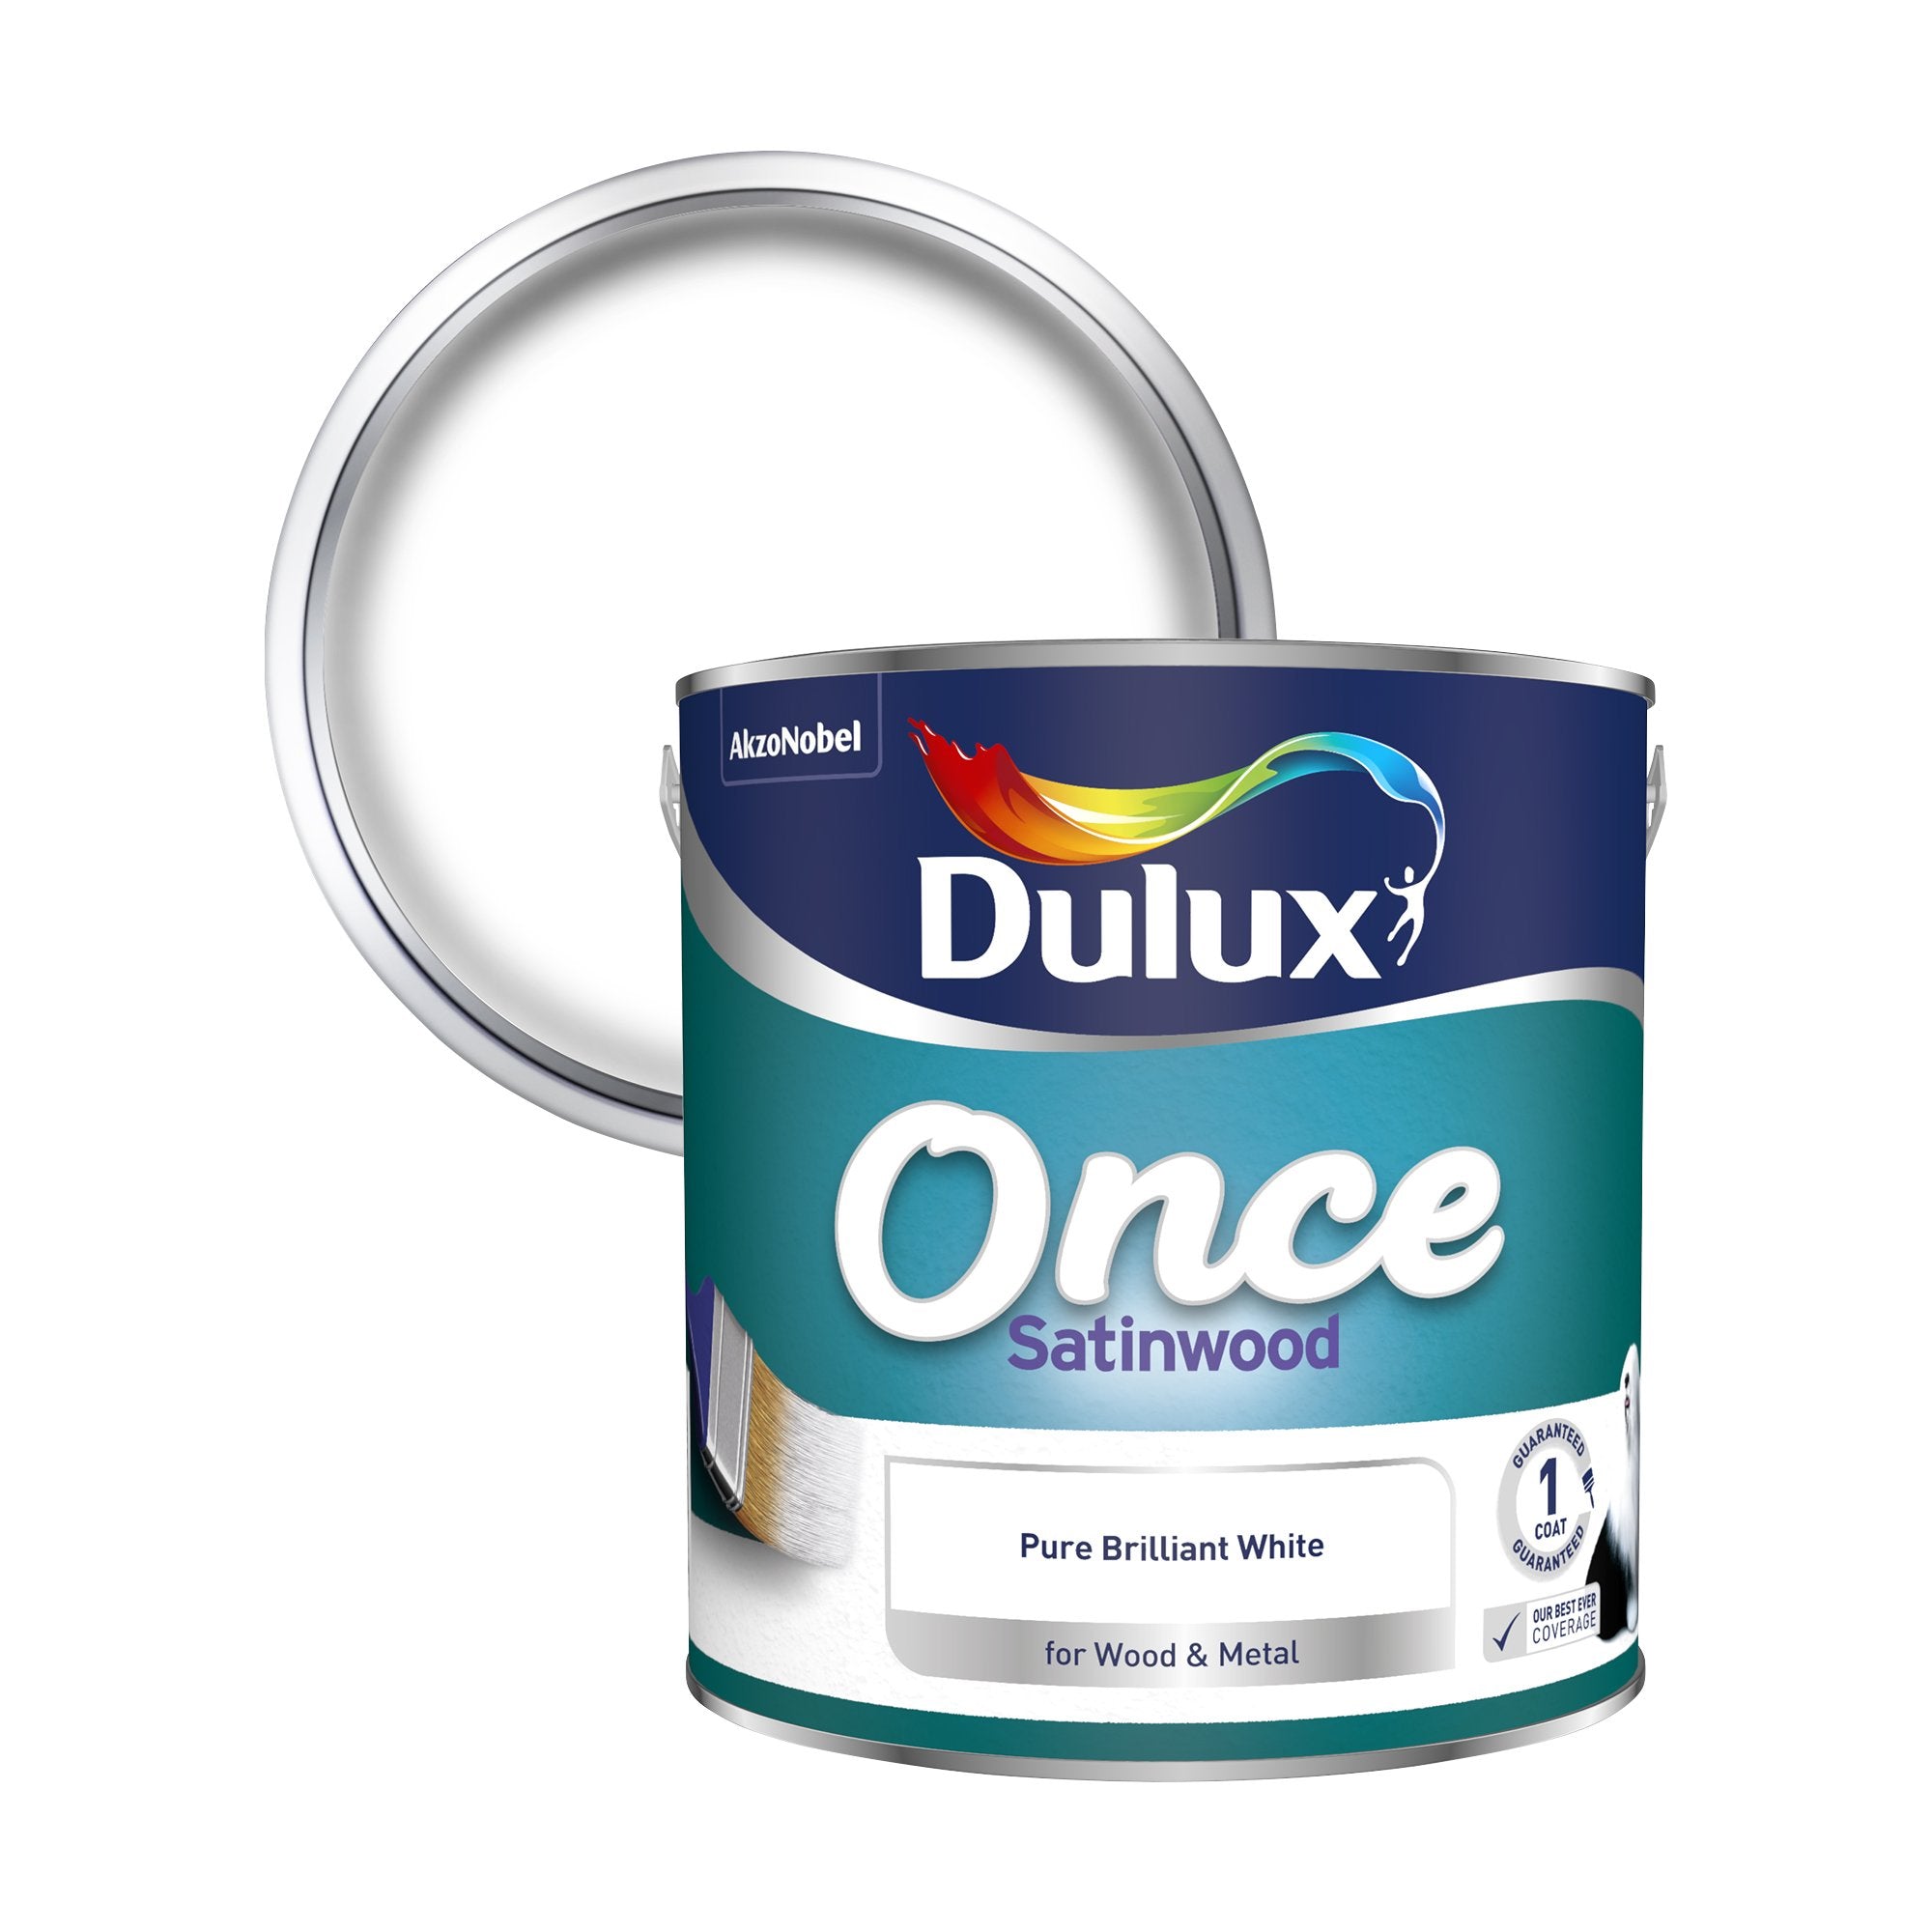 Dulux-Once-Satinwood-Paint-For-Wood-And-Metal-Pure-Brilliant-White-2.5L